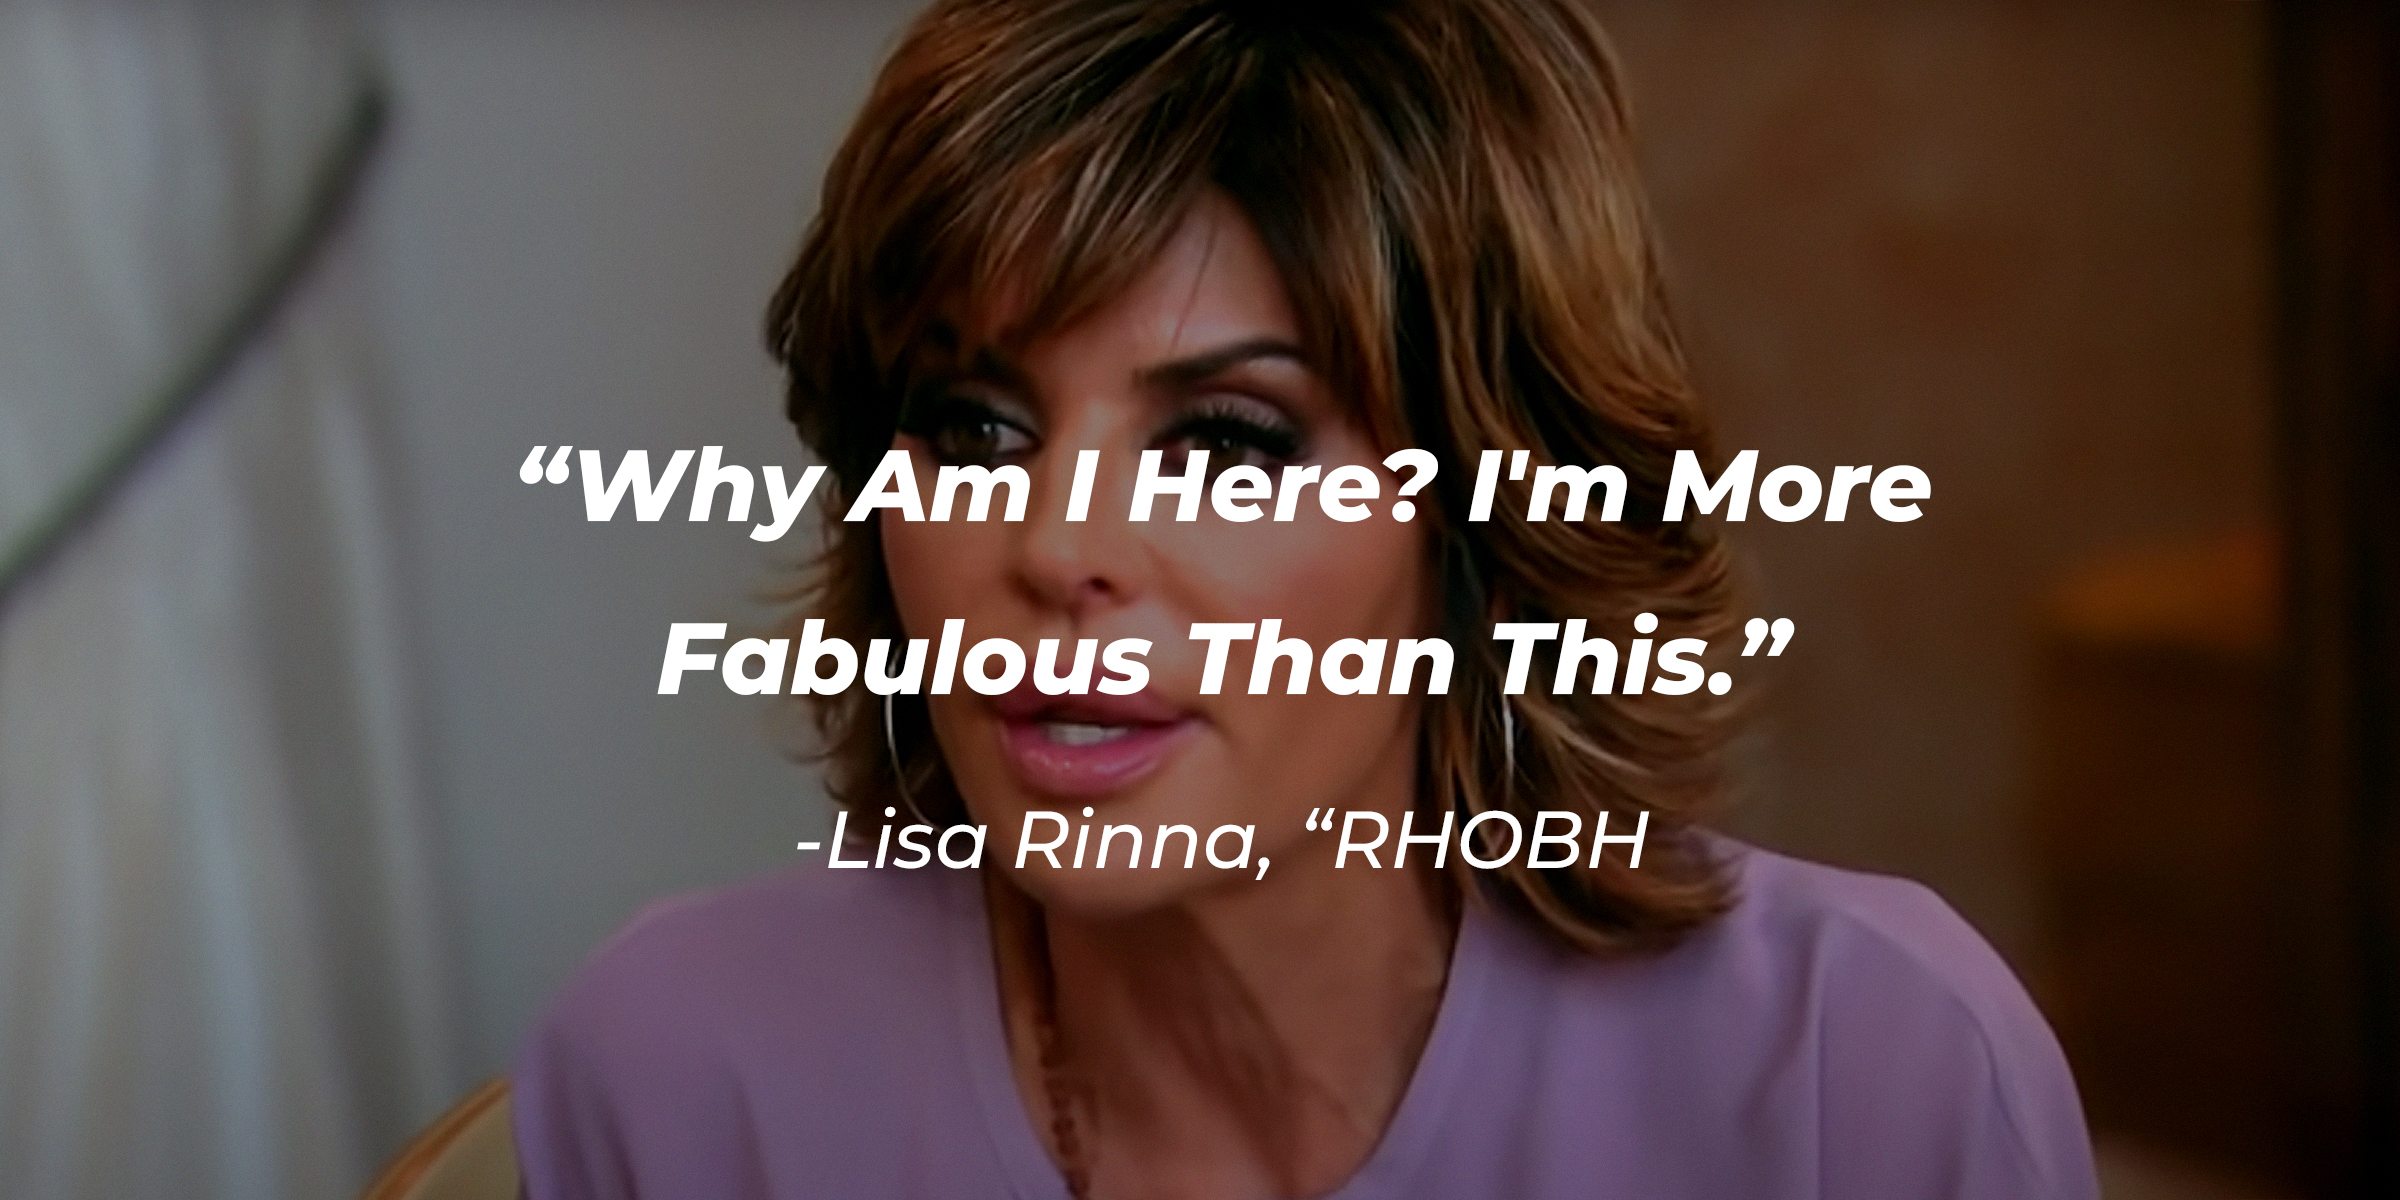 Lisa Rinna's with her quote from "The Real Housewives of Beverly Hills:" "Why am I here? I''m more fabulous than this." | Source: youtube.com/bravo